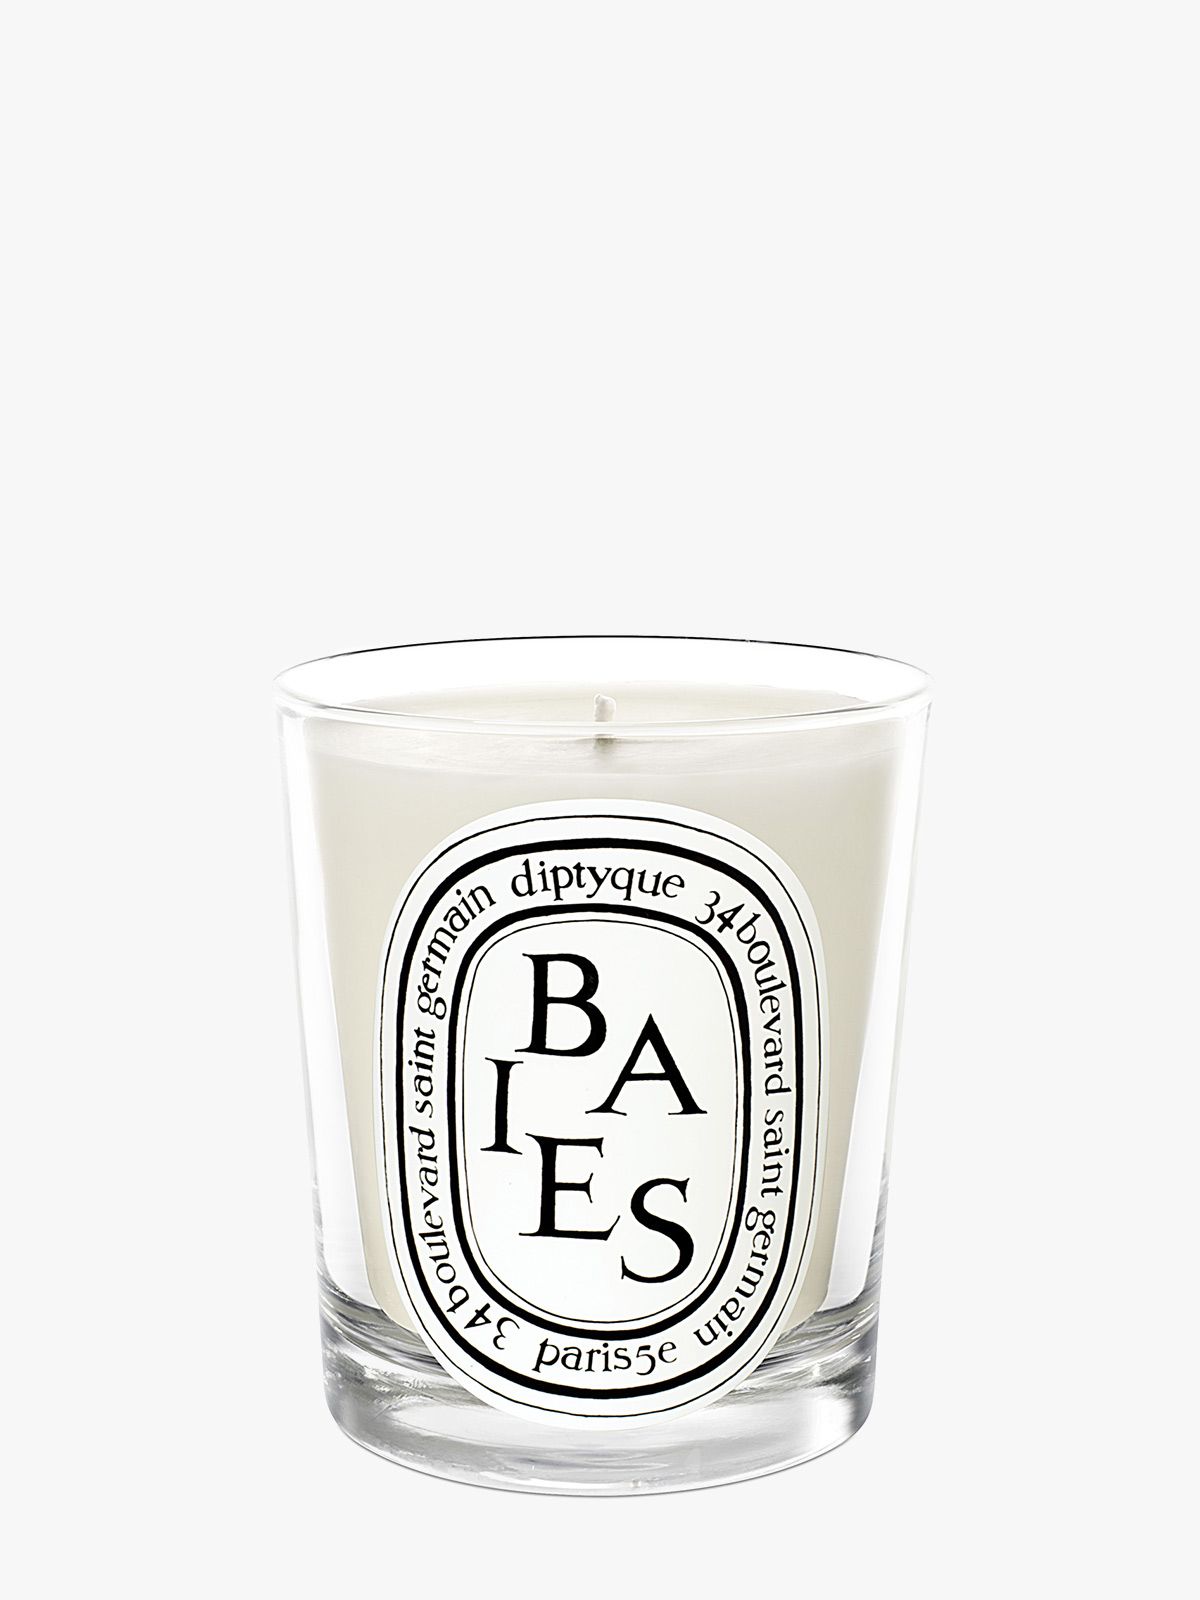 Diptyque Baies Scented Candle, 190g £49.00